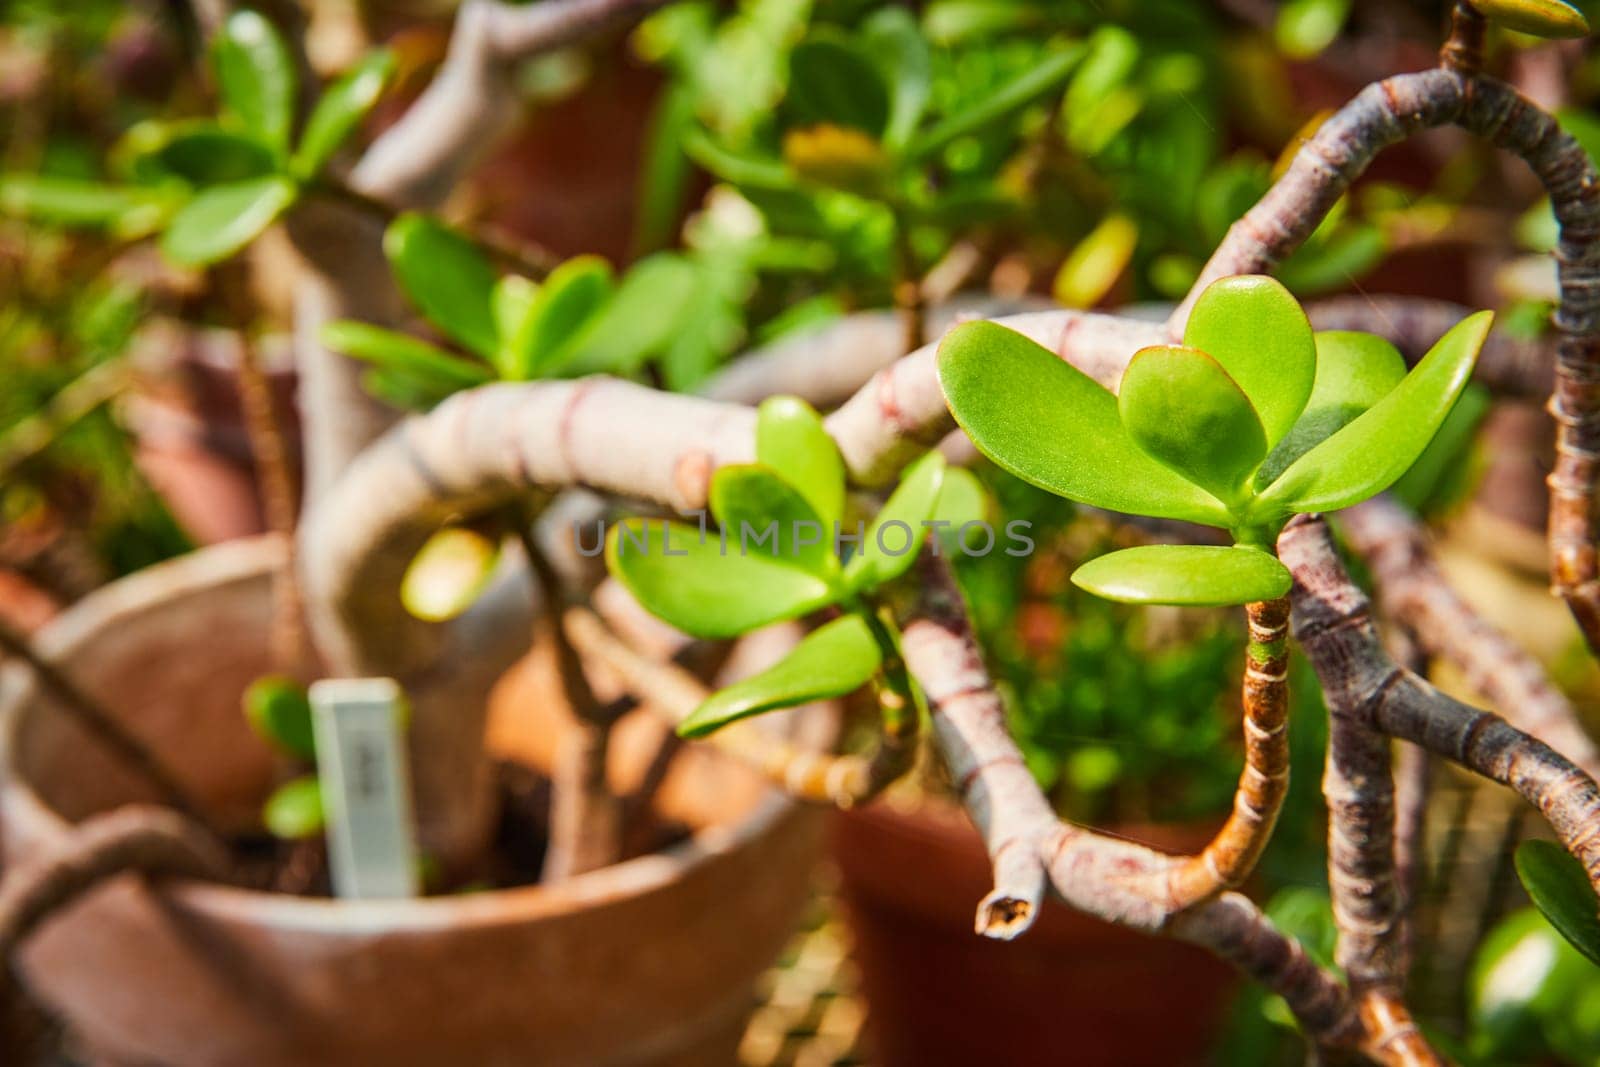 Vibrant Green Succulent in Garden - Close-Up Perspective by njproductions